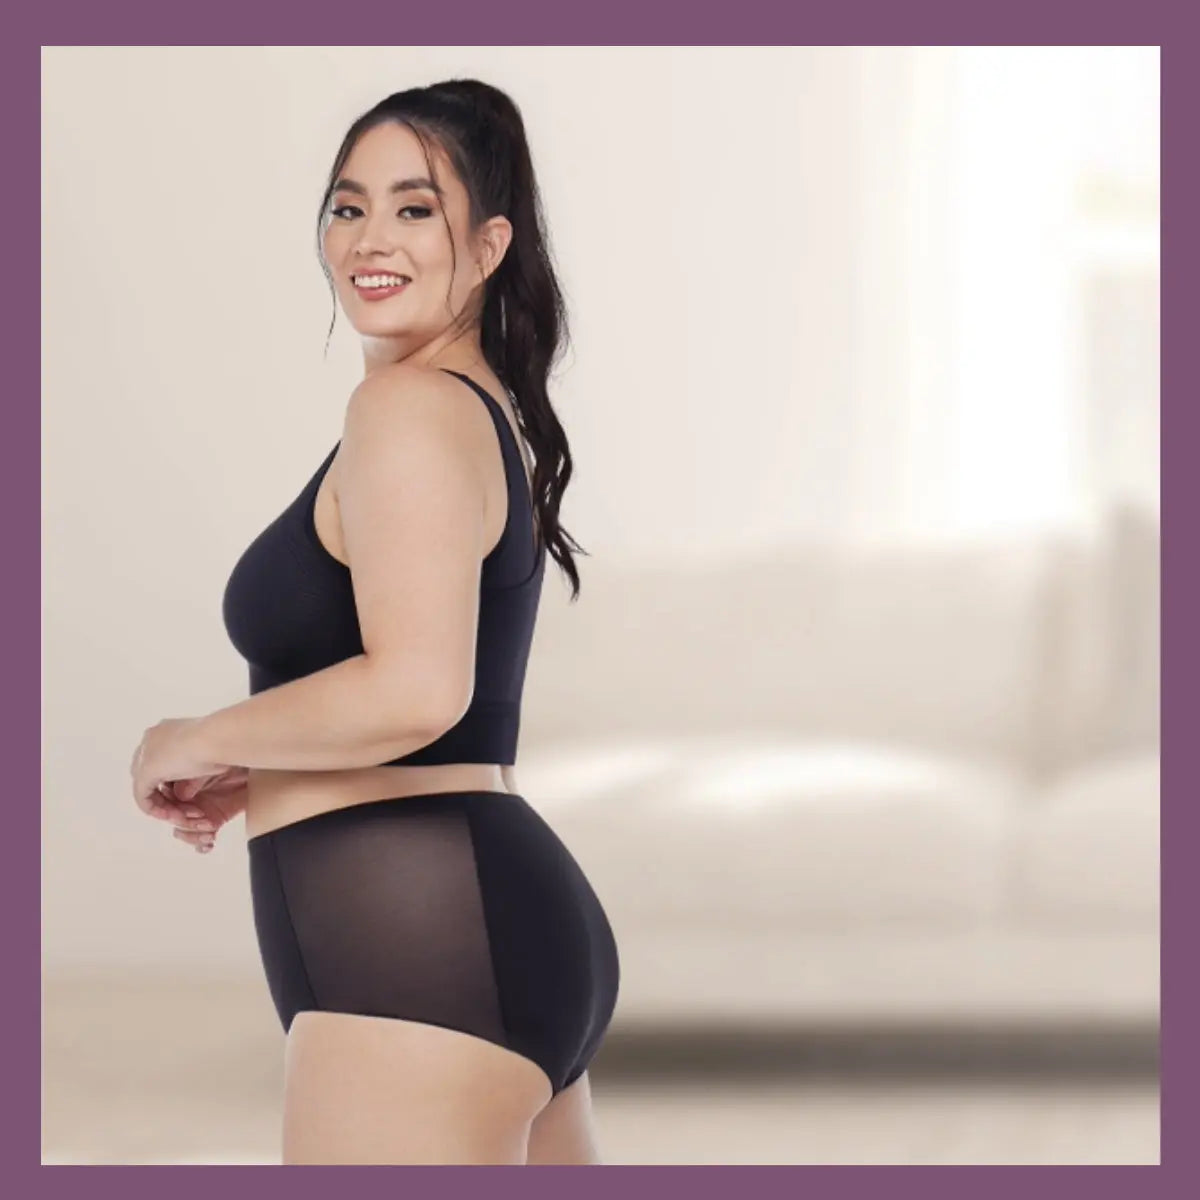 Spanx Challenger Invests in Body Confidence